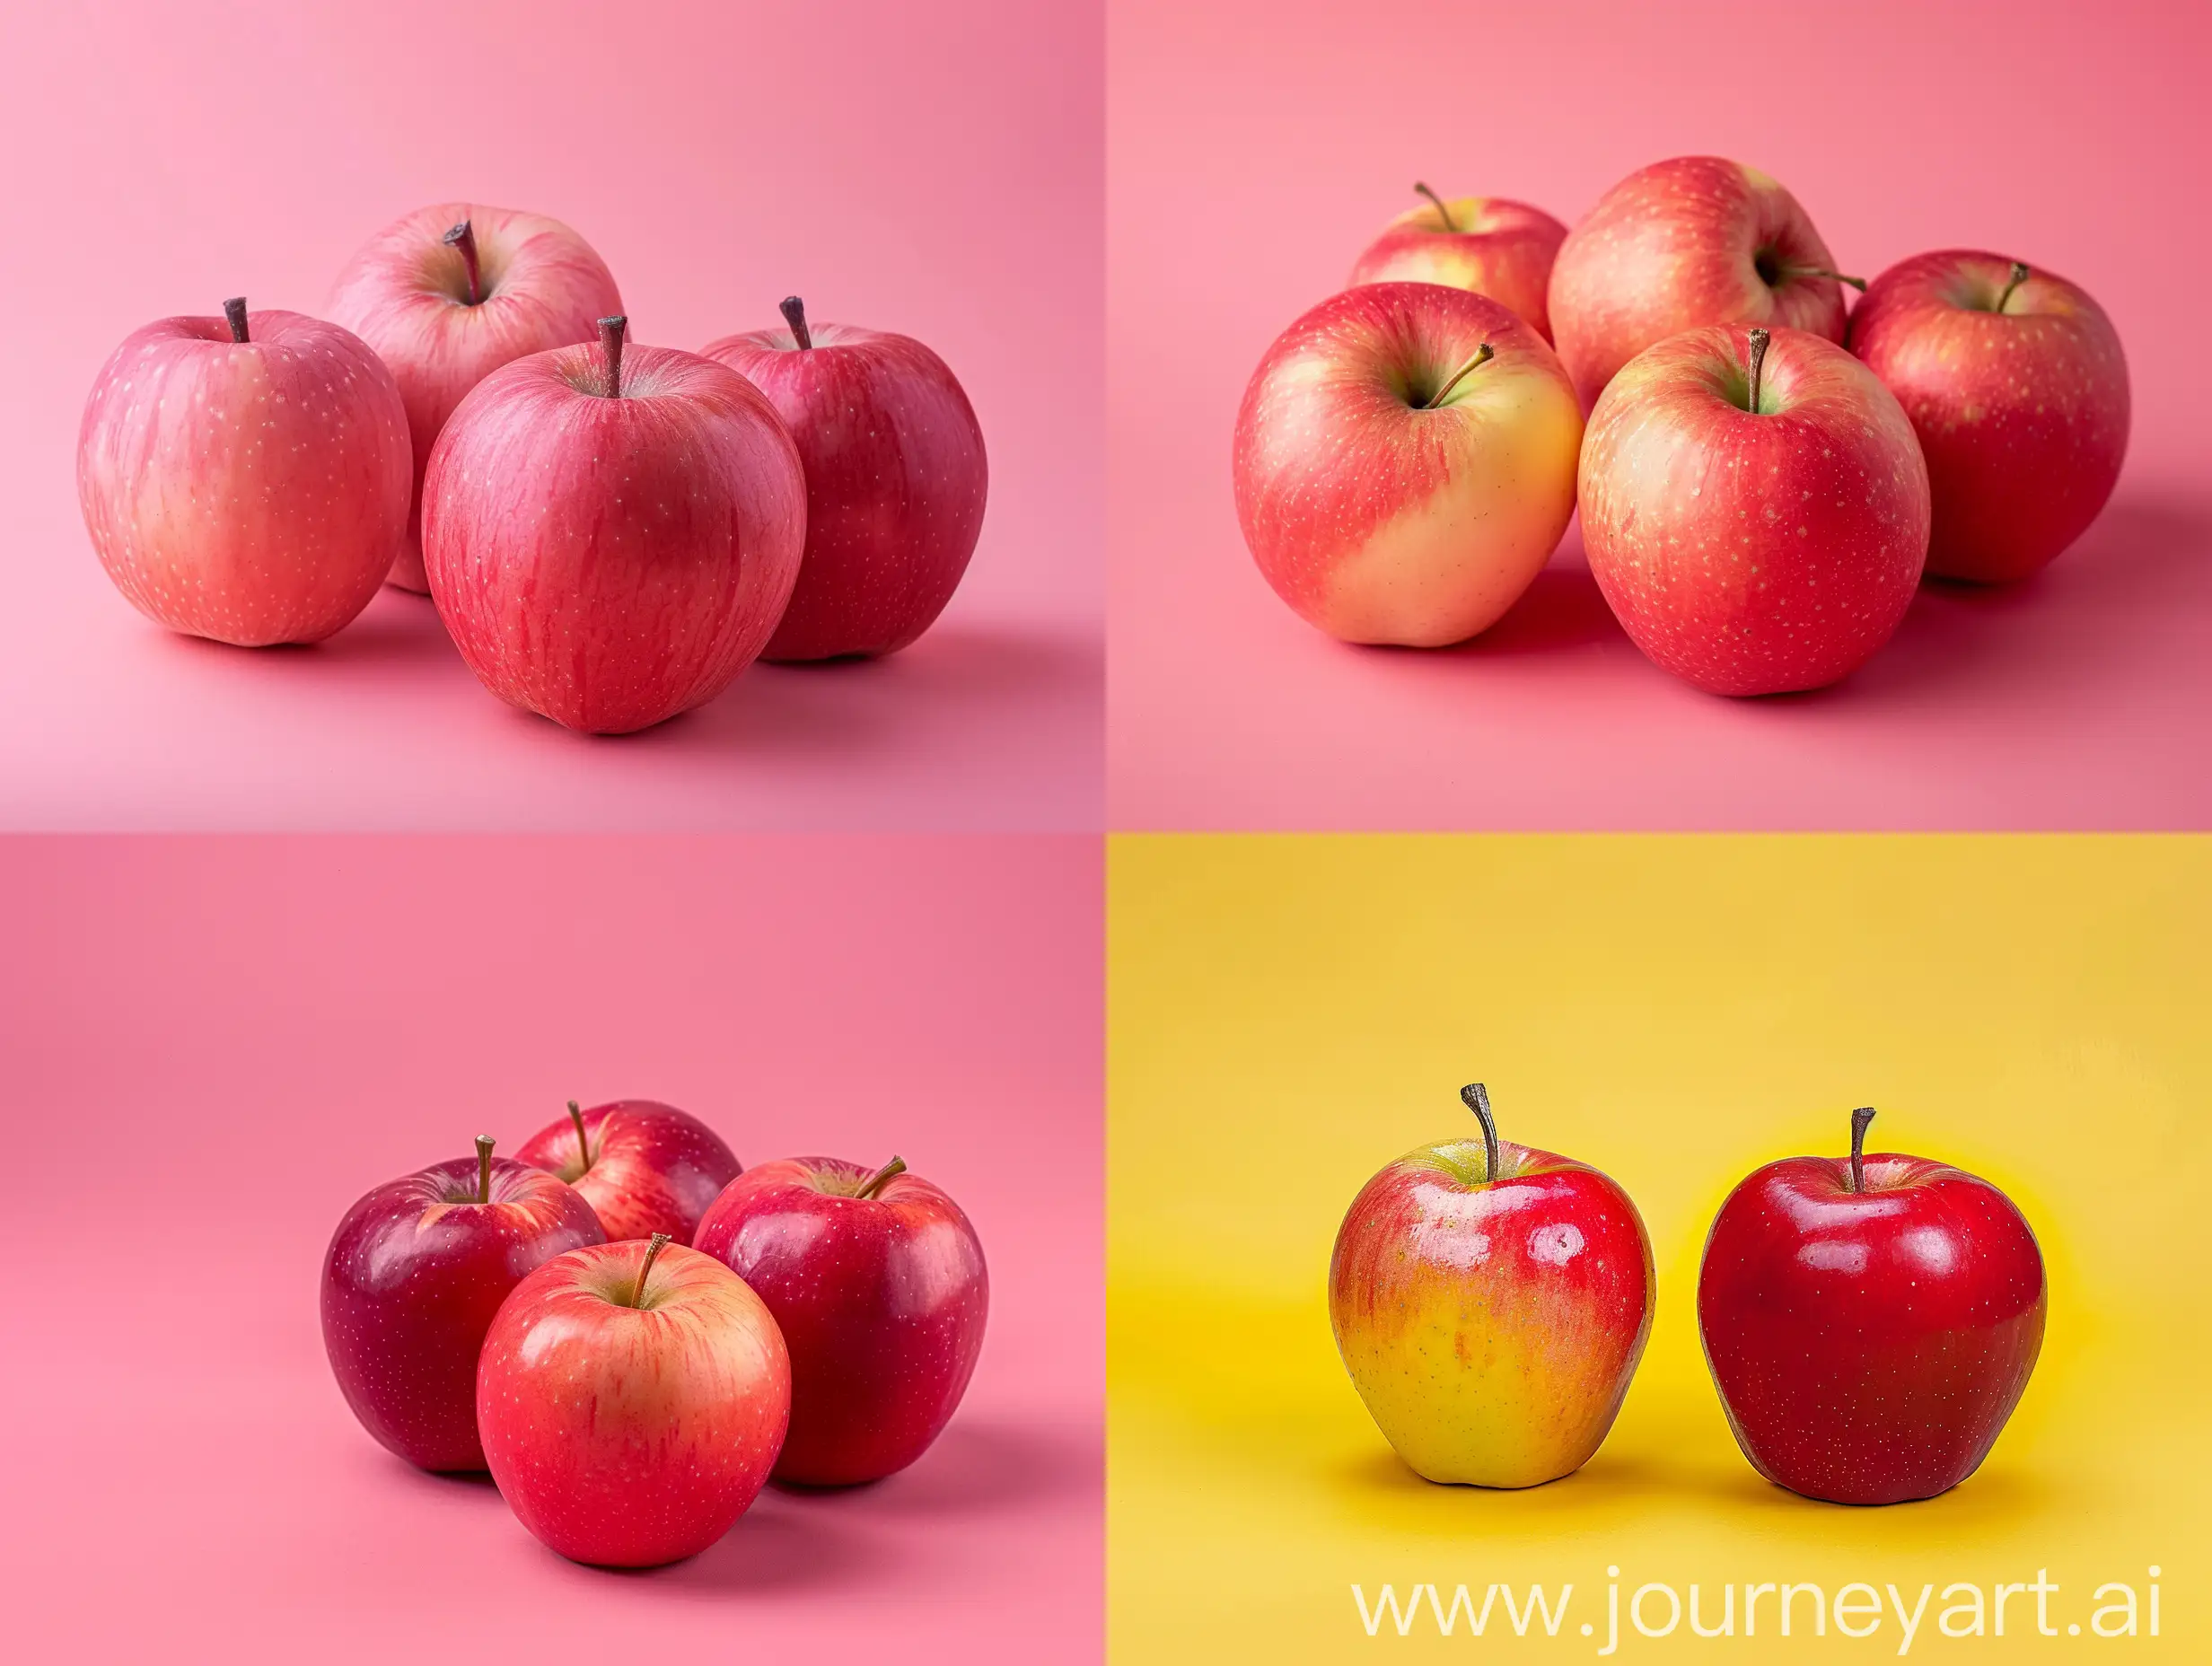 Vibrant-Apple-Studio-Photography-A-Colorful-Display-in-43-Aspect-Ratio